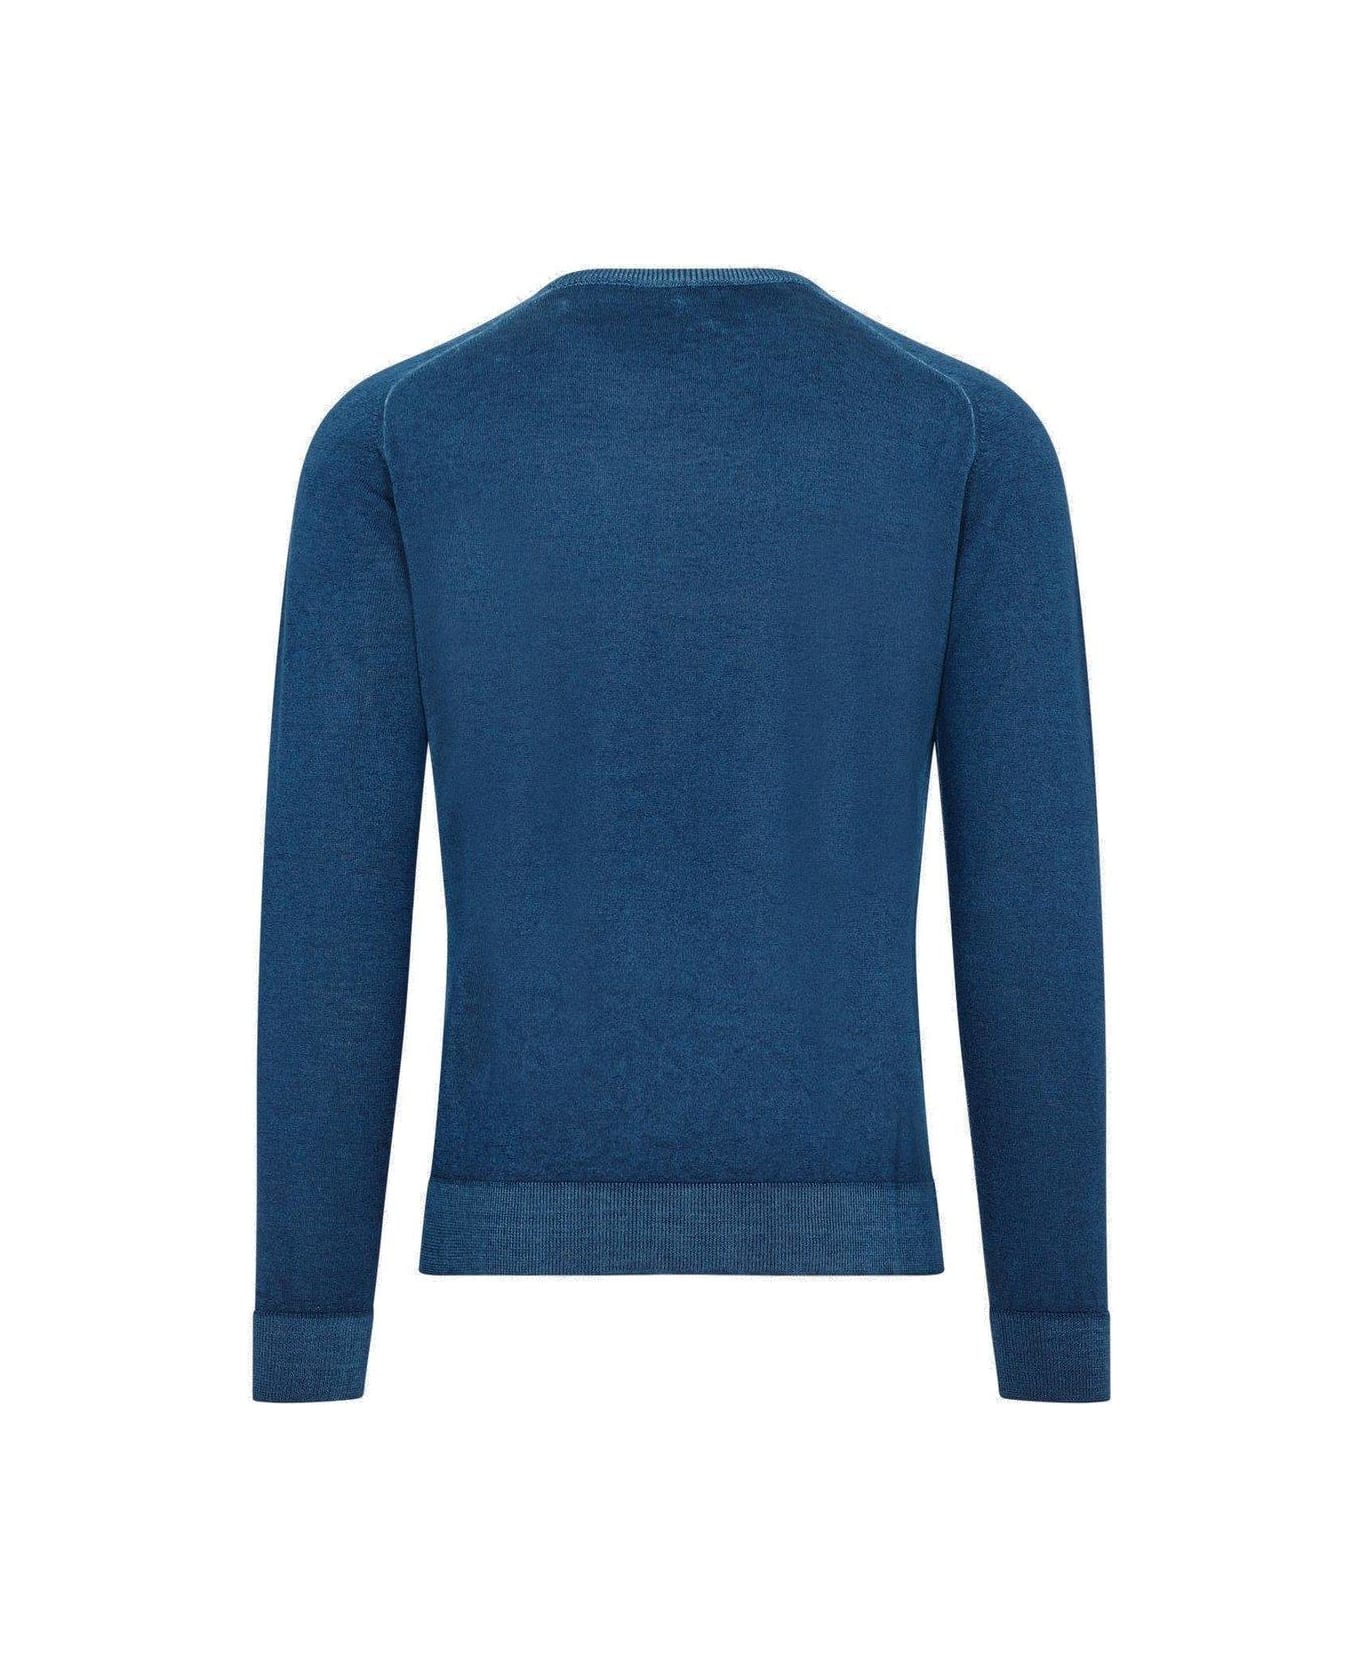 Etro Crewneck Knitted Sweater